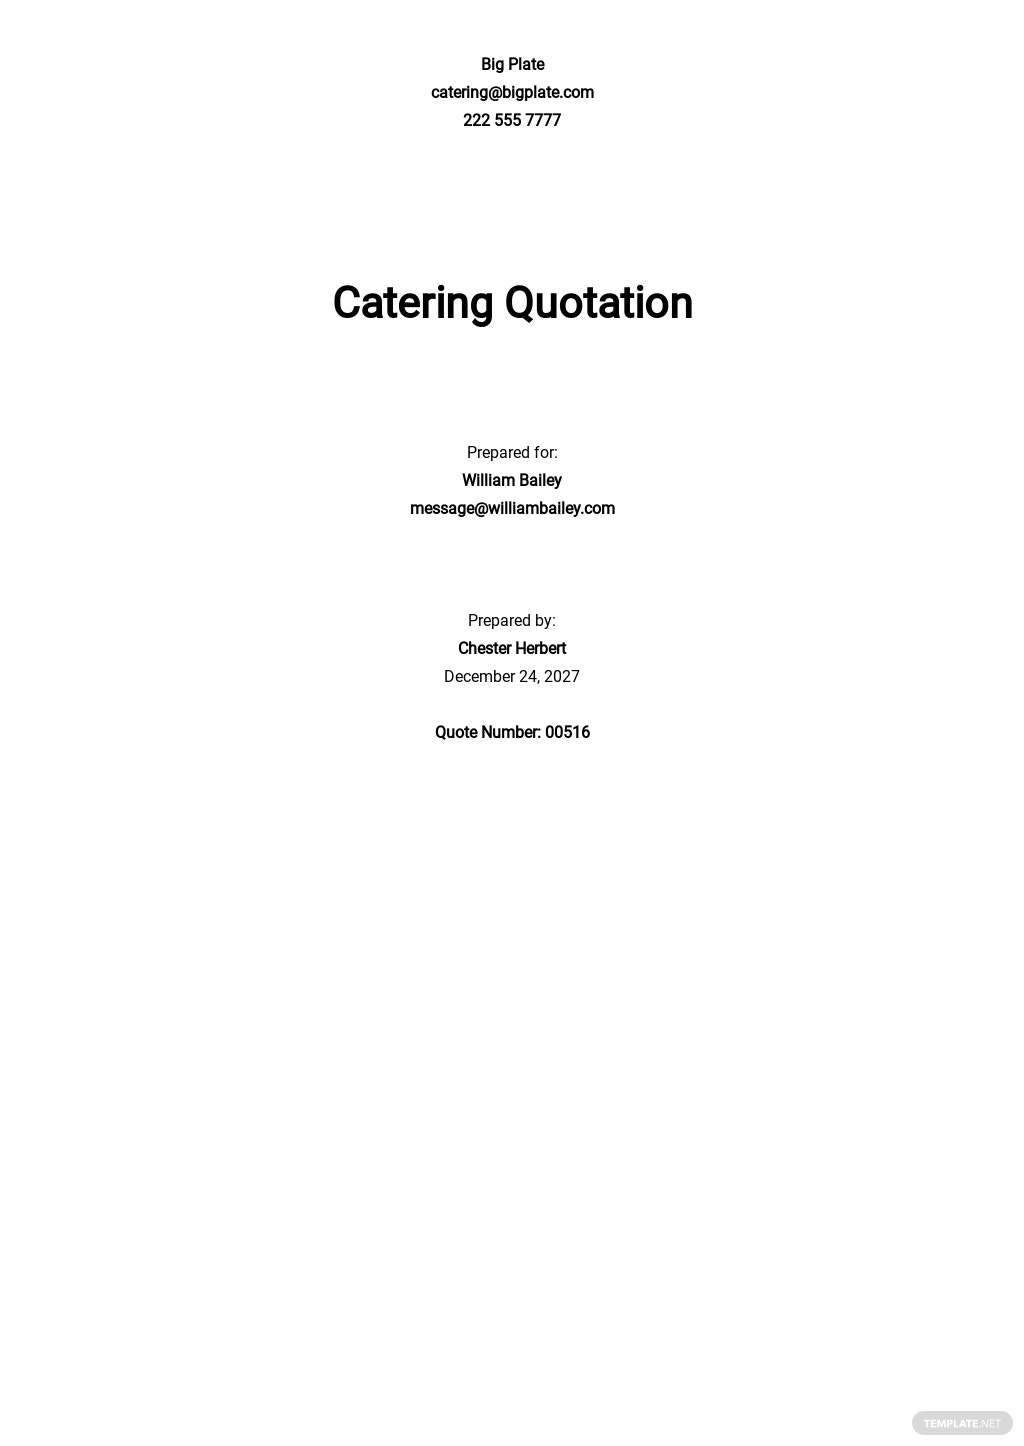 catering quotation template